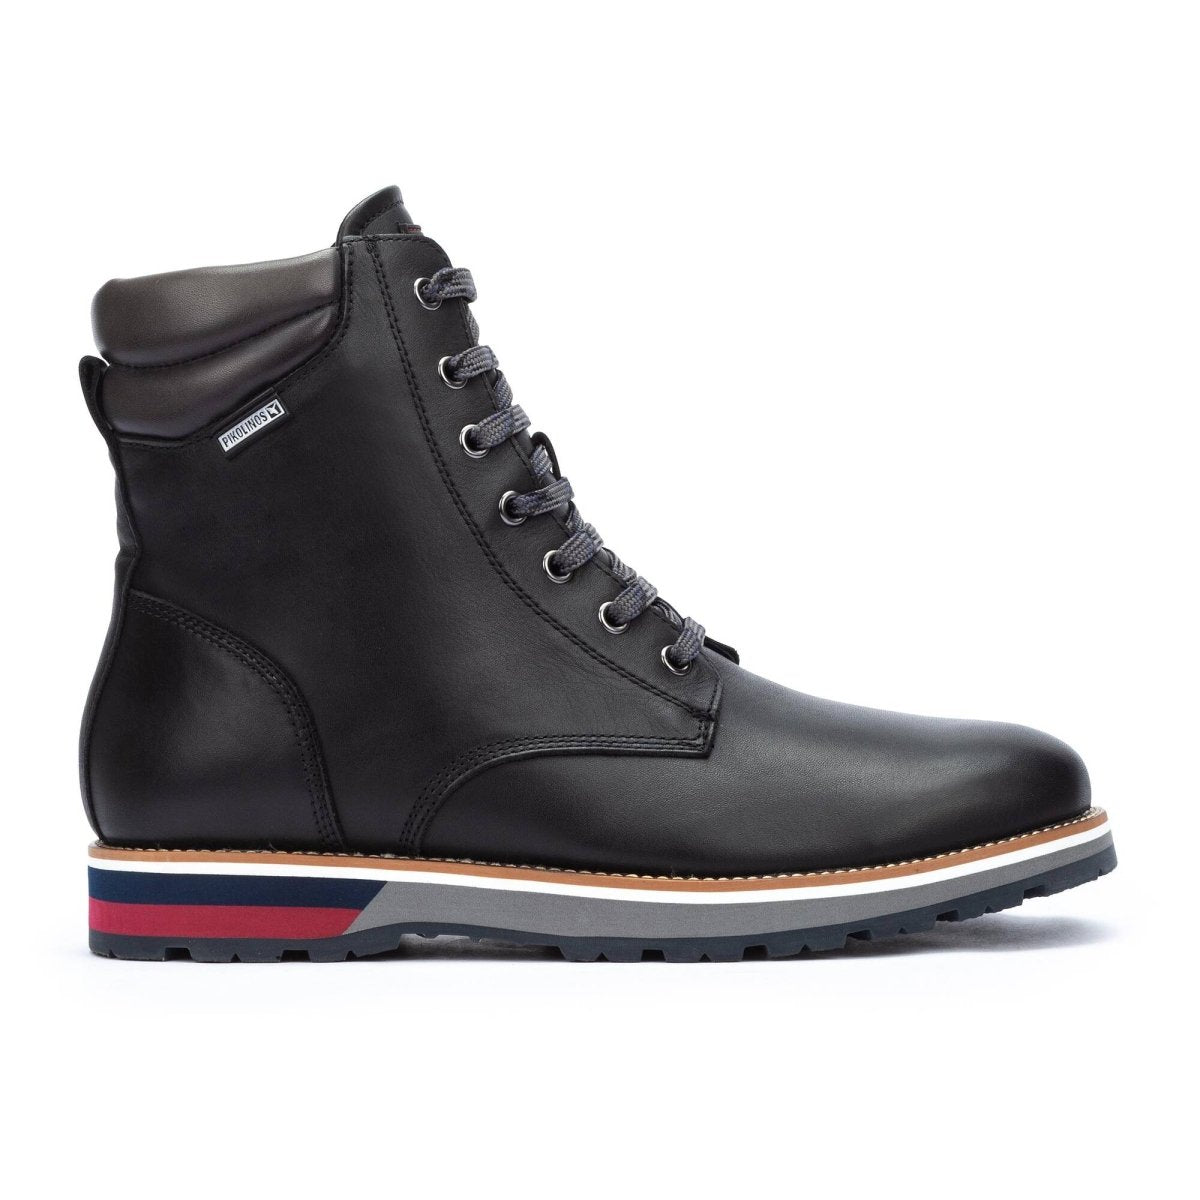 PIKOLINOS PIRINEOS M6S-N8113 MEN'S WARM LINING ANKLE BOOTS IN BLACK - TLW Shoes